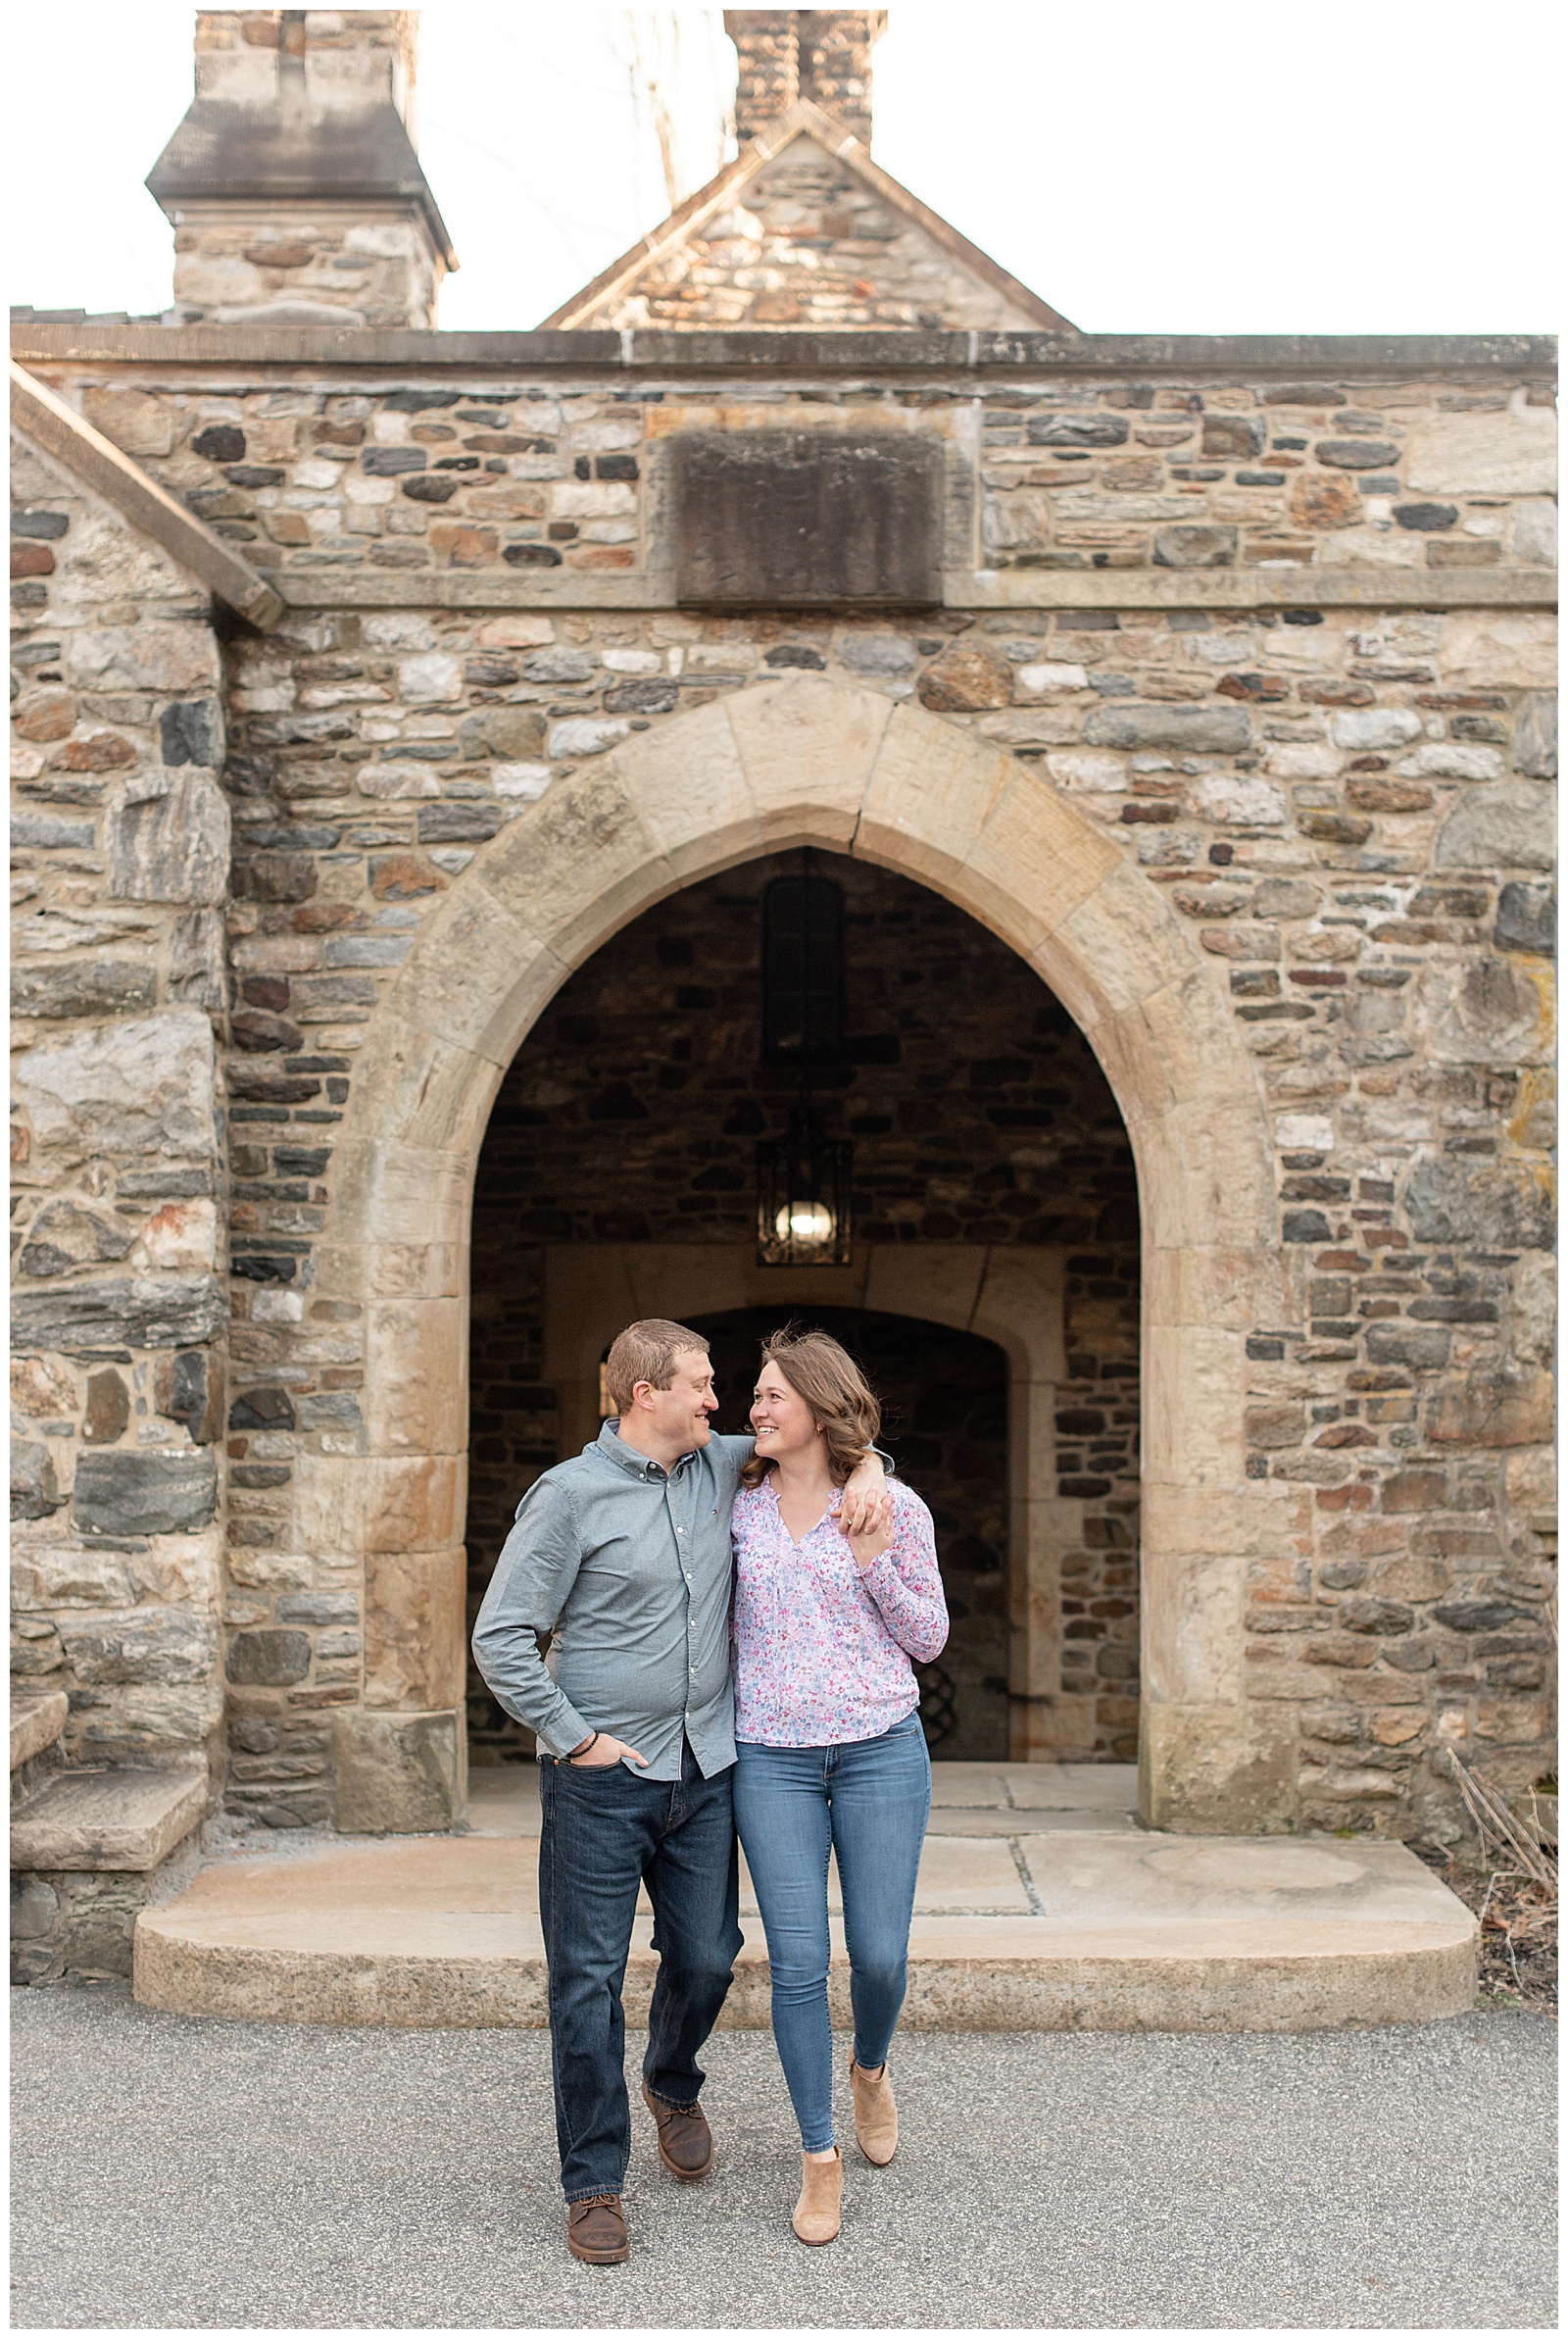 engaged couple standing by stone archway looking at each other smiling on winter day at ridley creek park